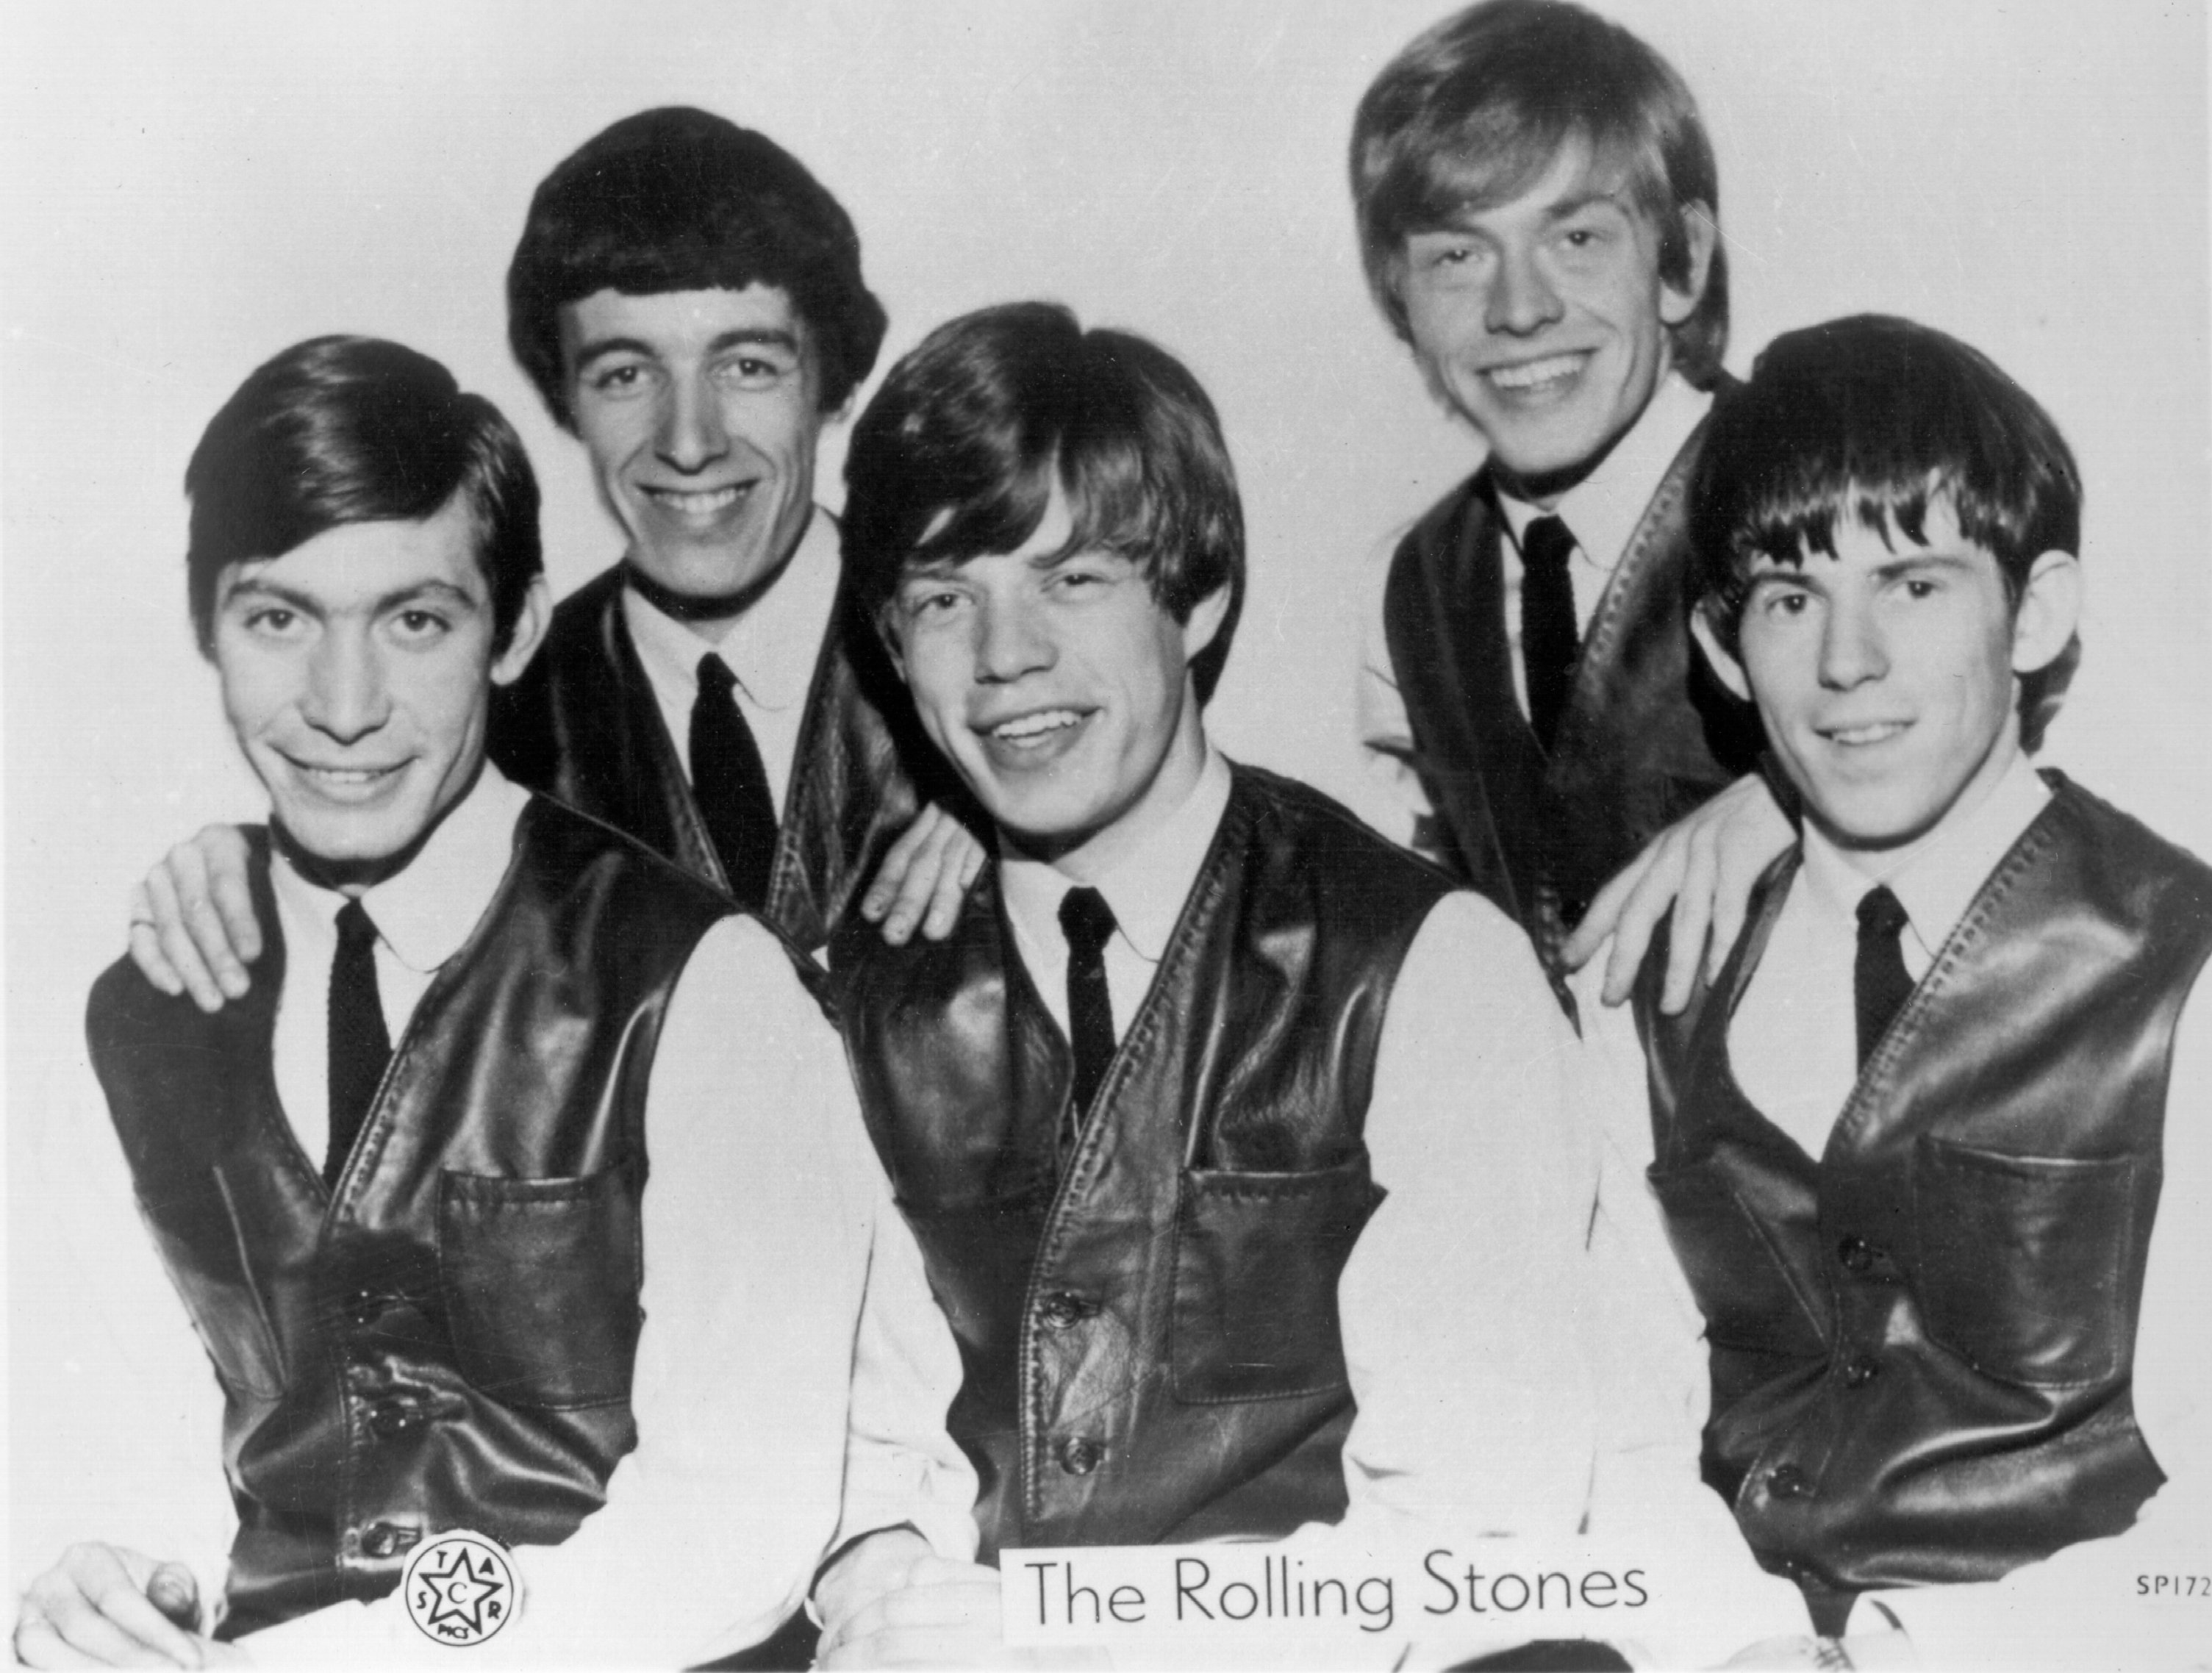 The Rolling Stones in front of a white background